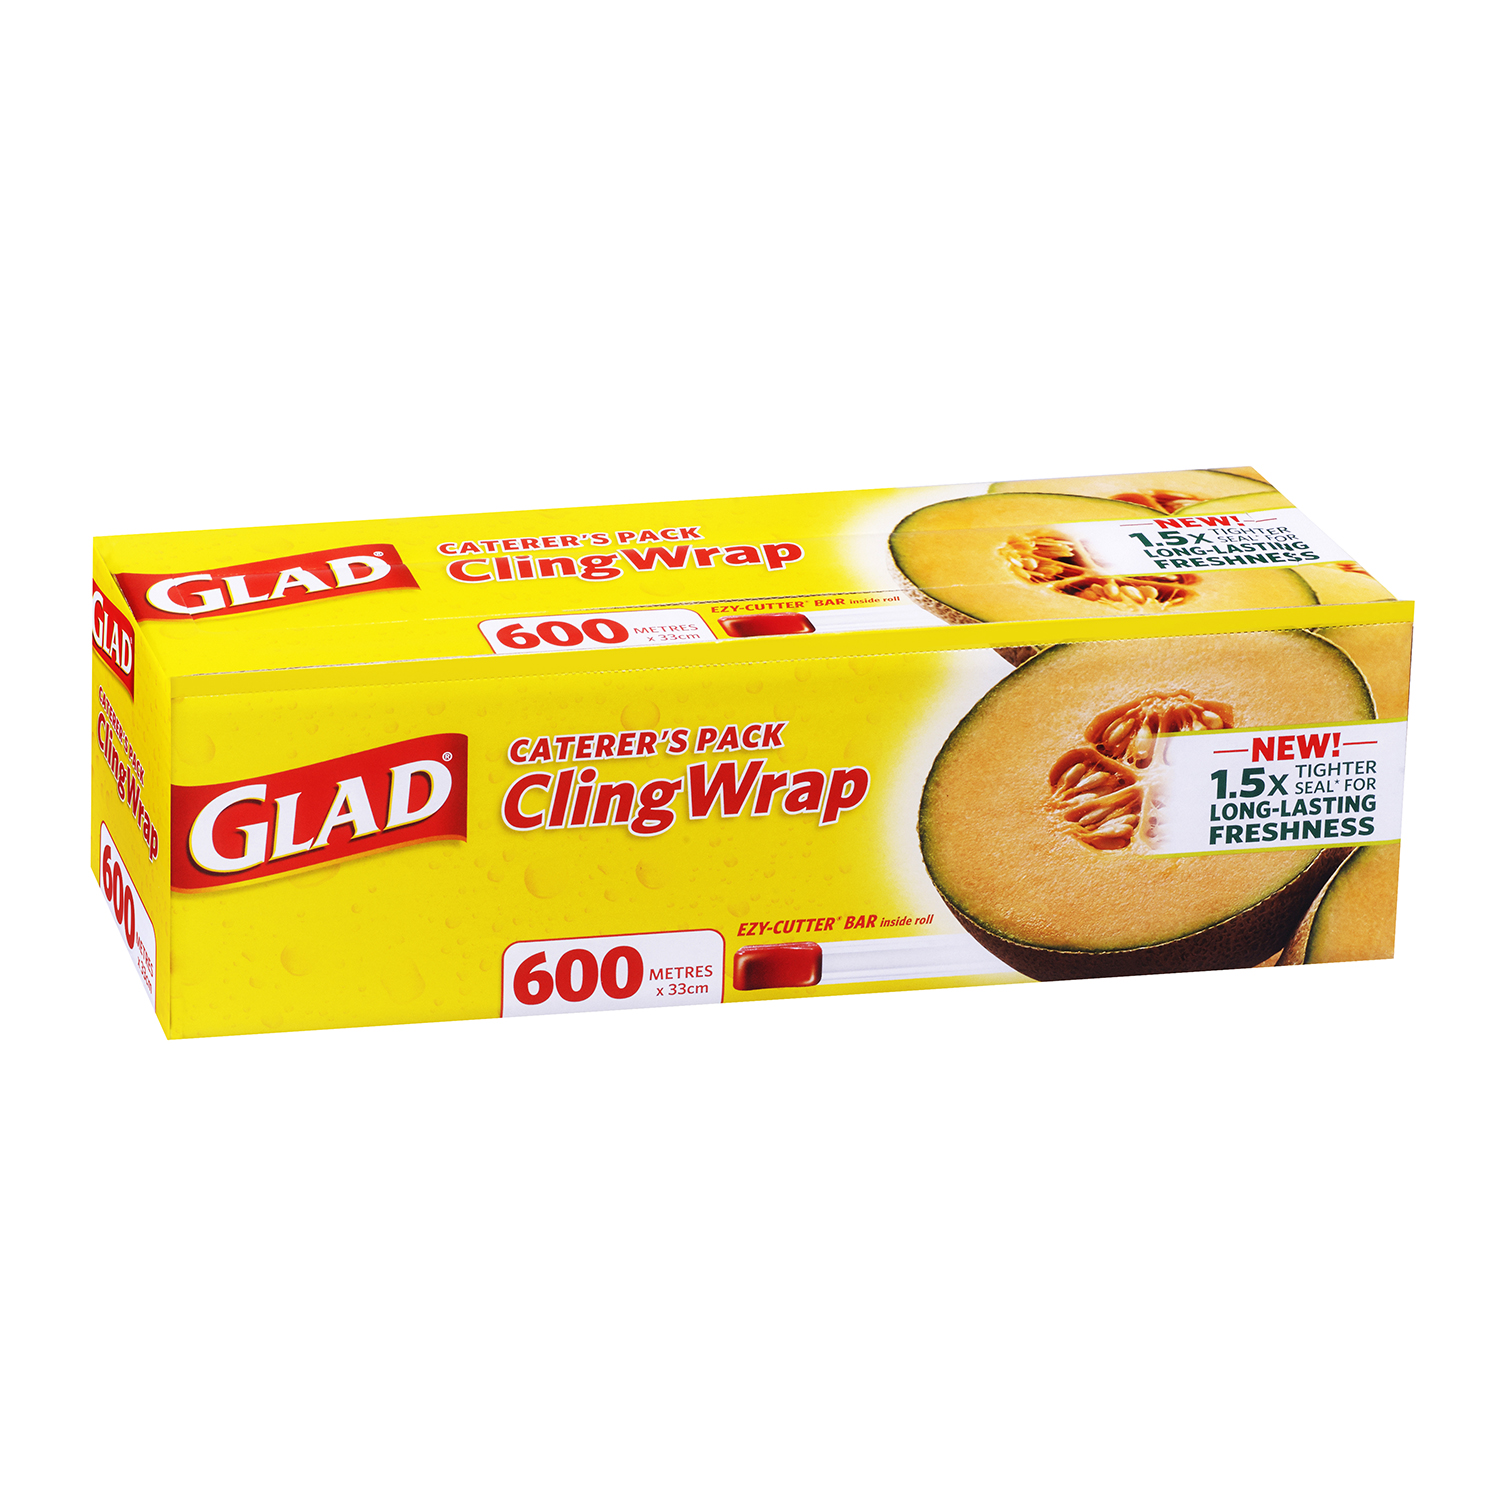 Glad Wrap Catering Pack 600M